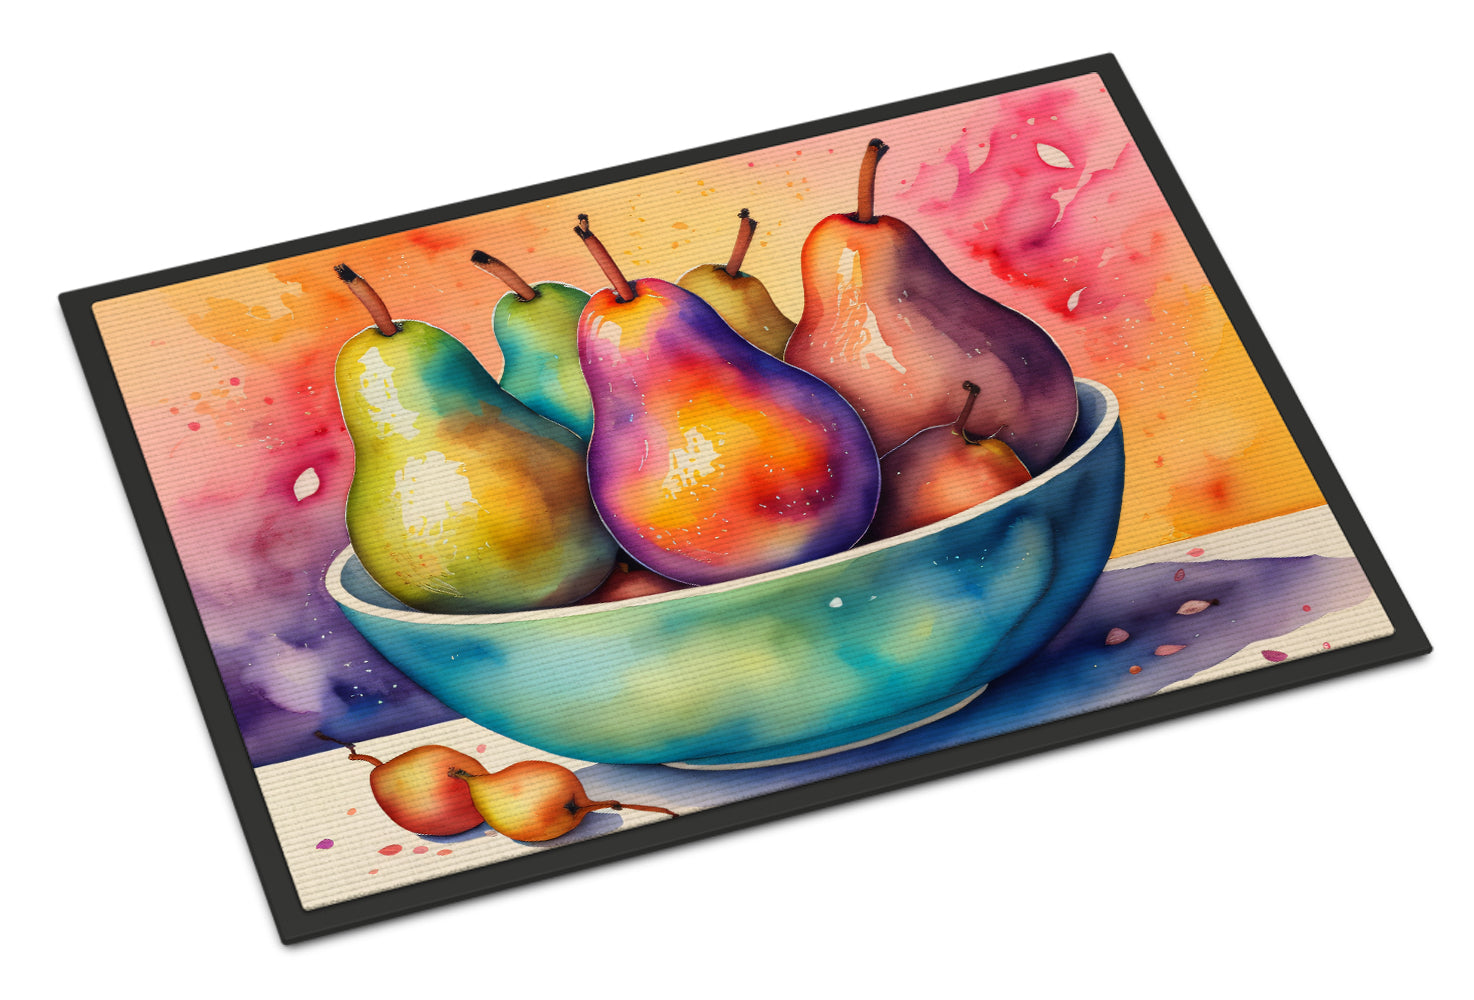 Buy this Colorful Pears Doormat 18x27